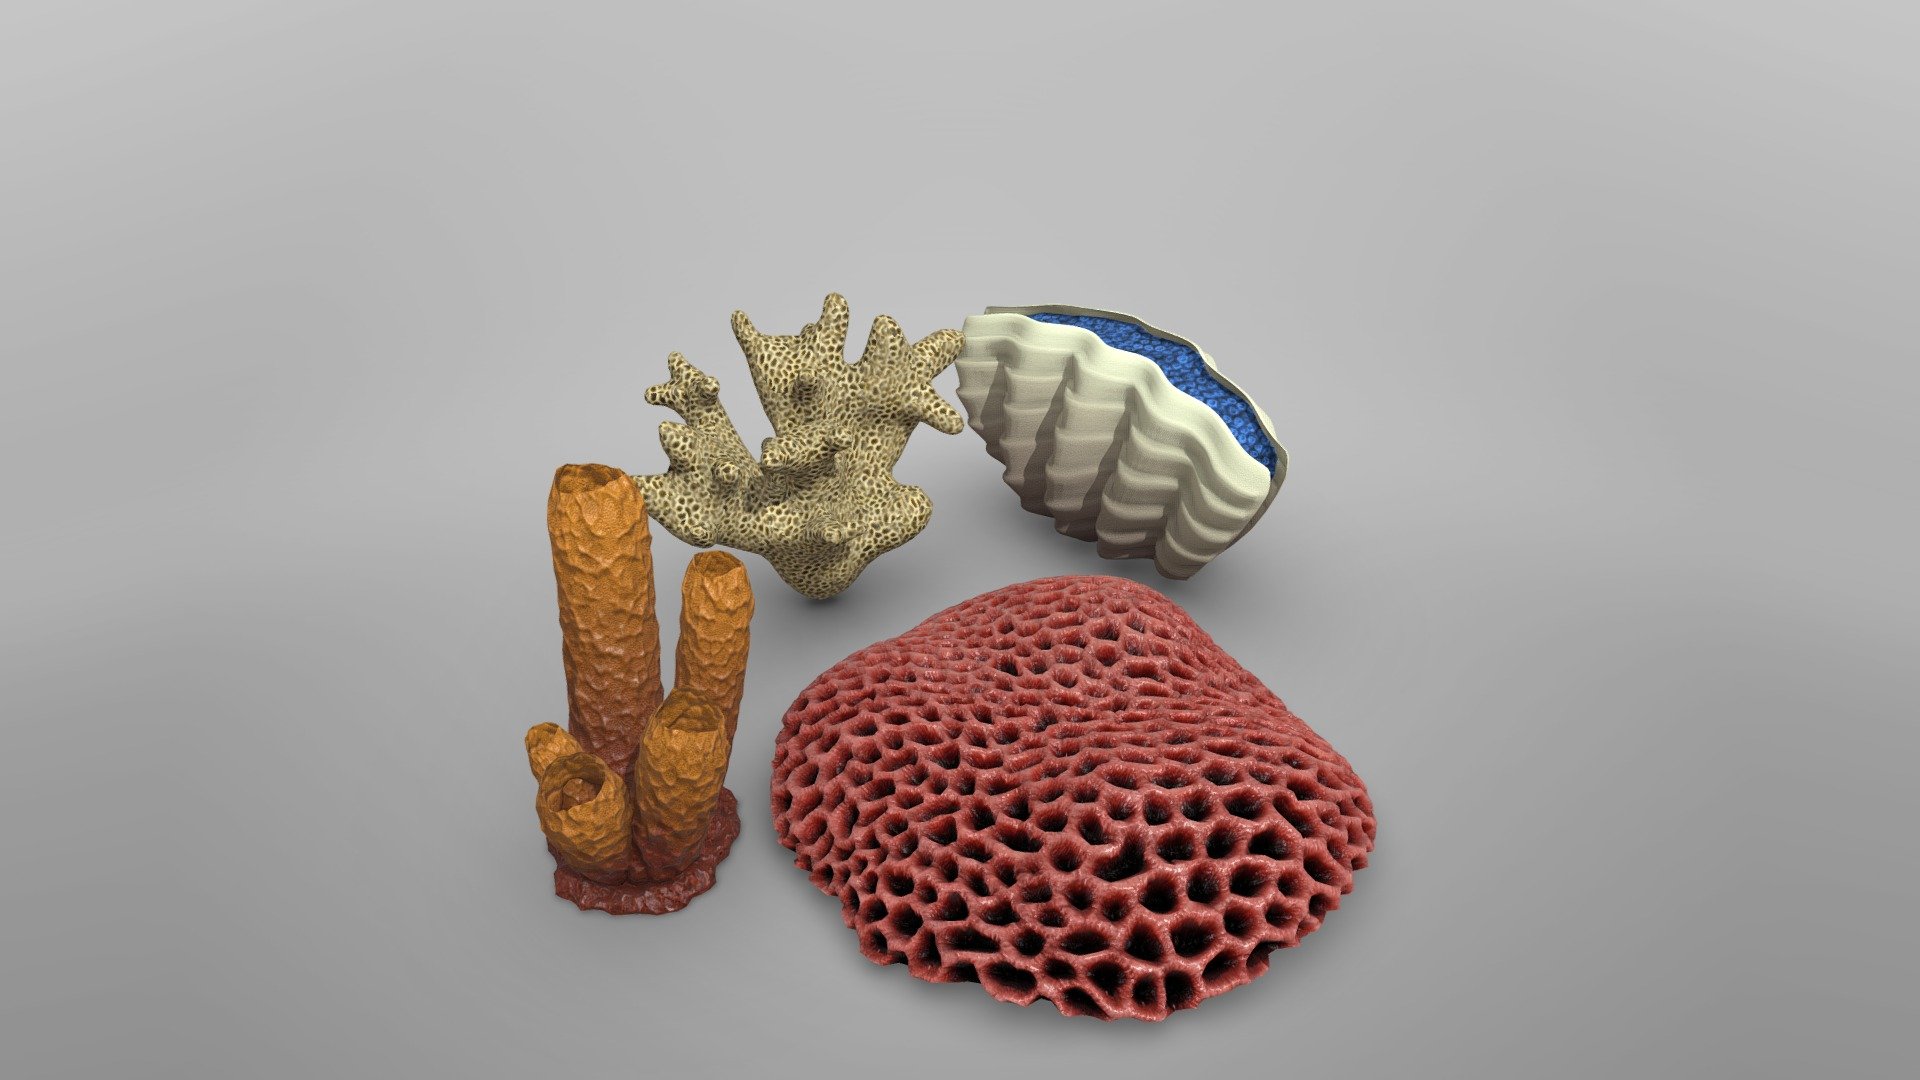 3D lowpoly models of 4 different types of corals. 

Individual corals available in links:


Red coral
Blue coral 
Orange coral 
White coral
 - Lowpoly Coral Pack - Download Free 3D model by assetfactory 3d model